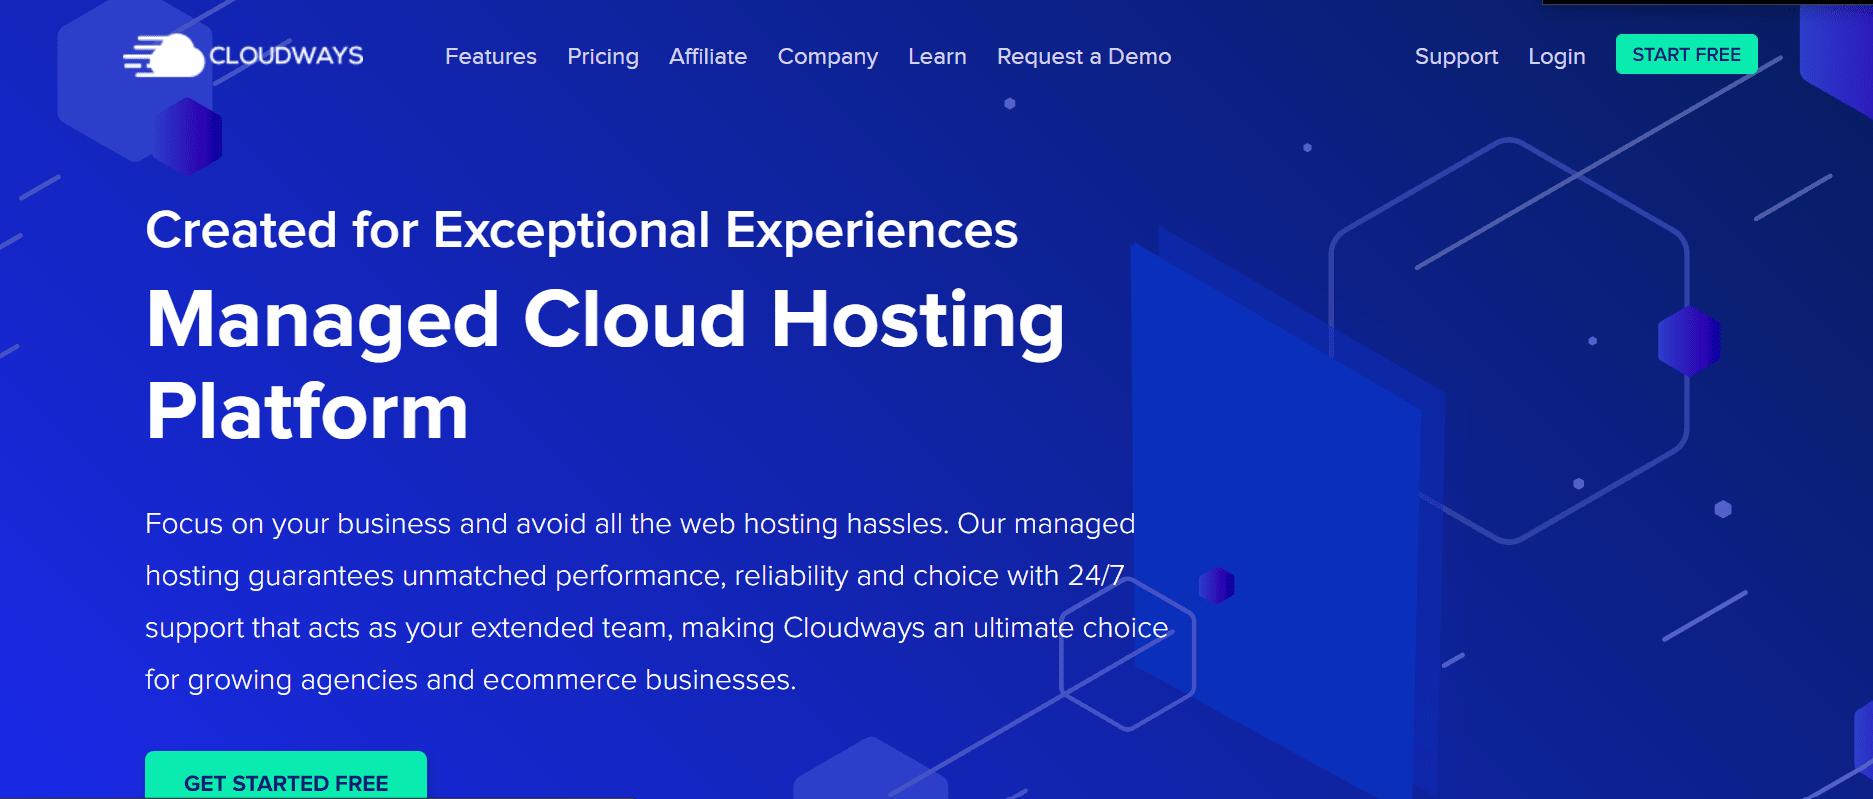 Coudways Overview - Web Hosting Services For Small Business